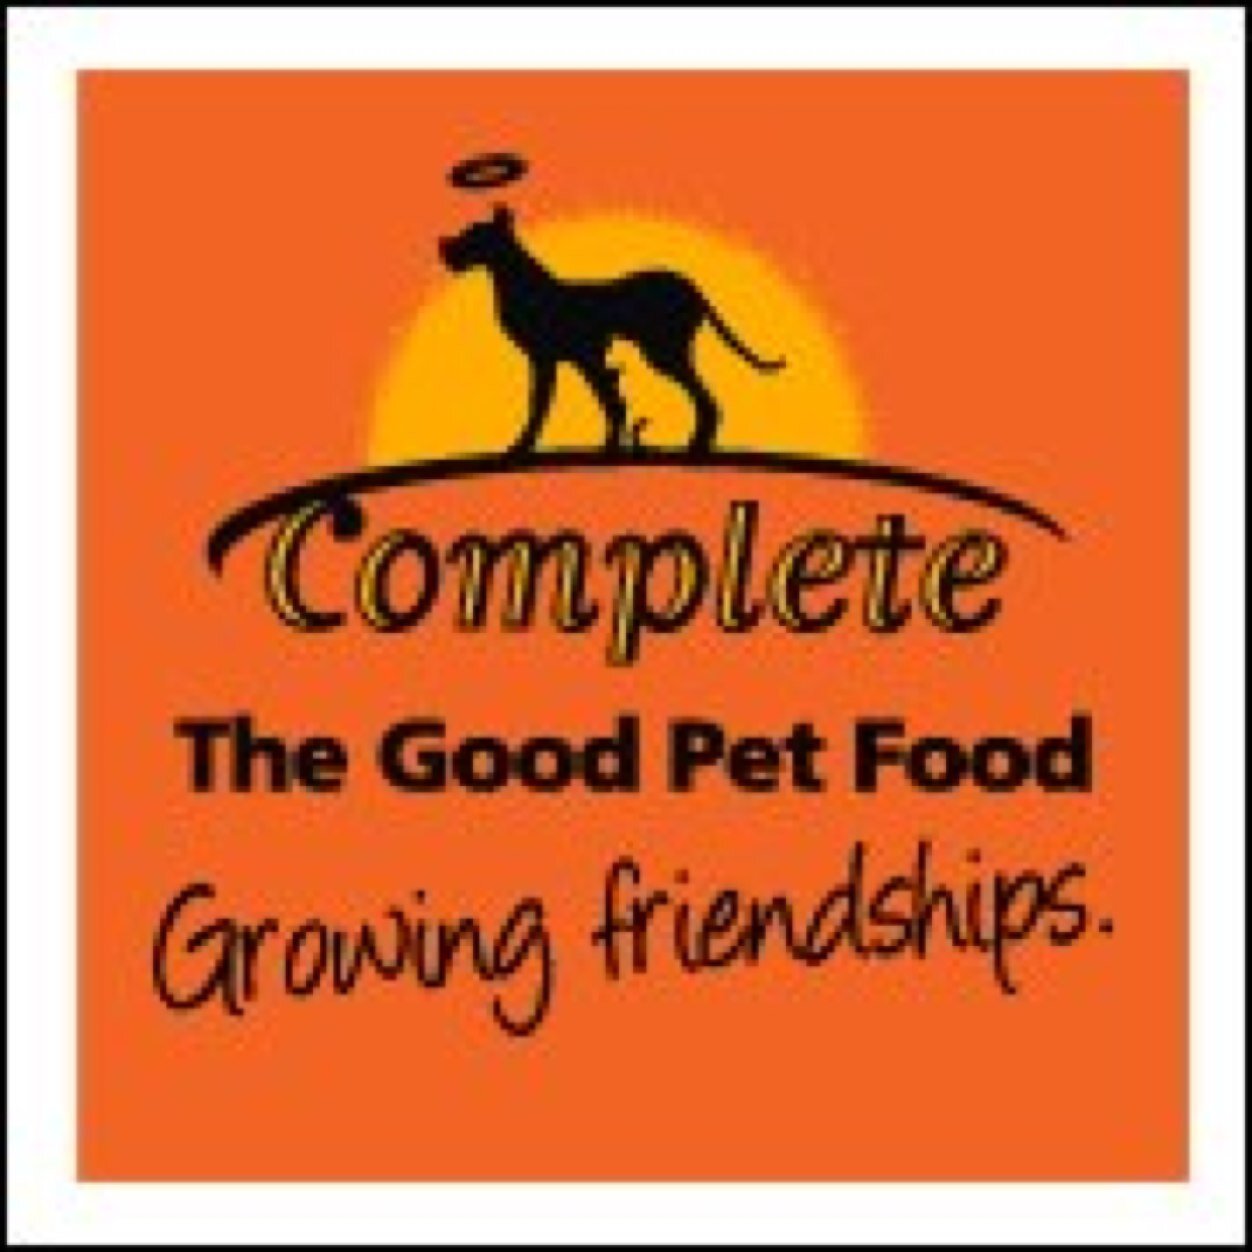 Complete Pet Food is best known for our high quality,ostrich protein dog food. We manufacture a range of quality pet products.